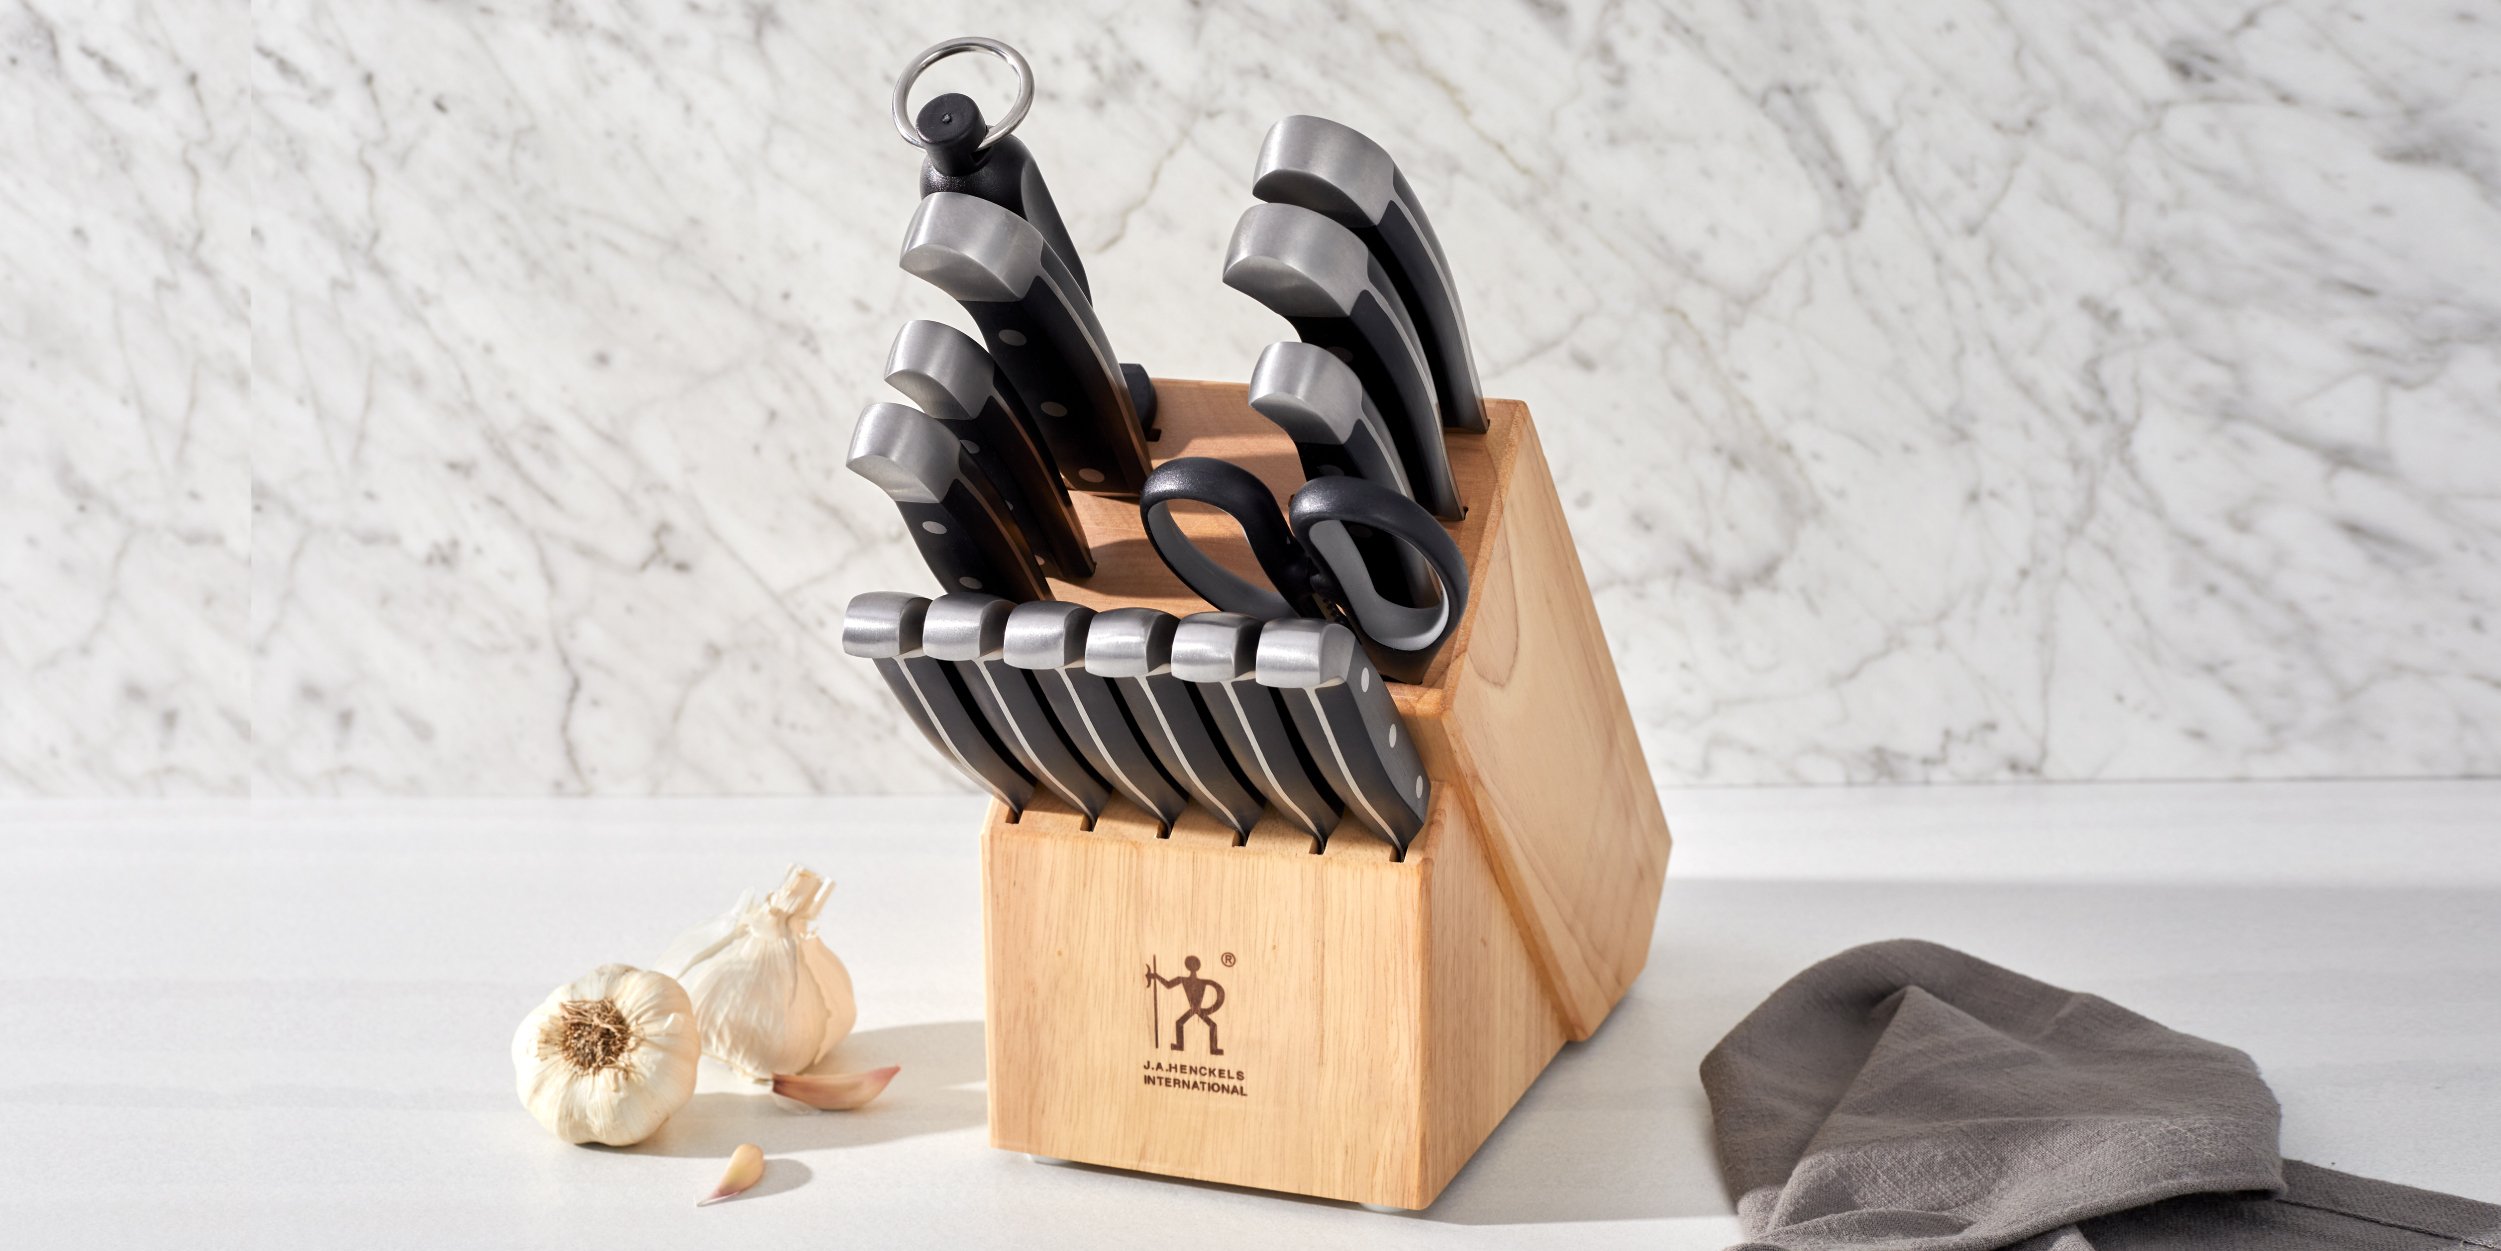 ZWILLING USA (@zwilling_usa) • Instagram photos and videos